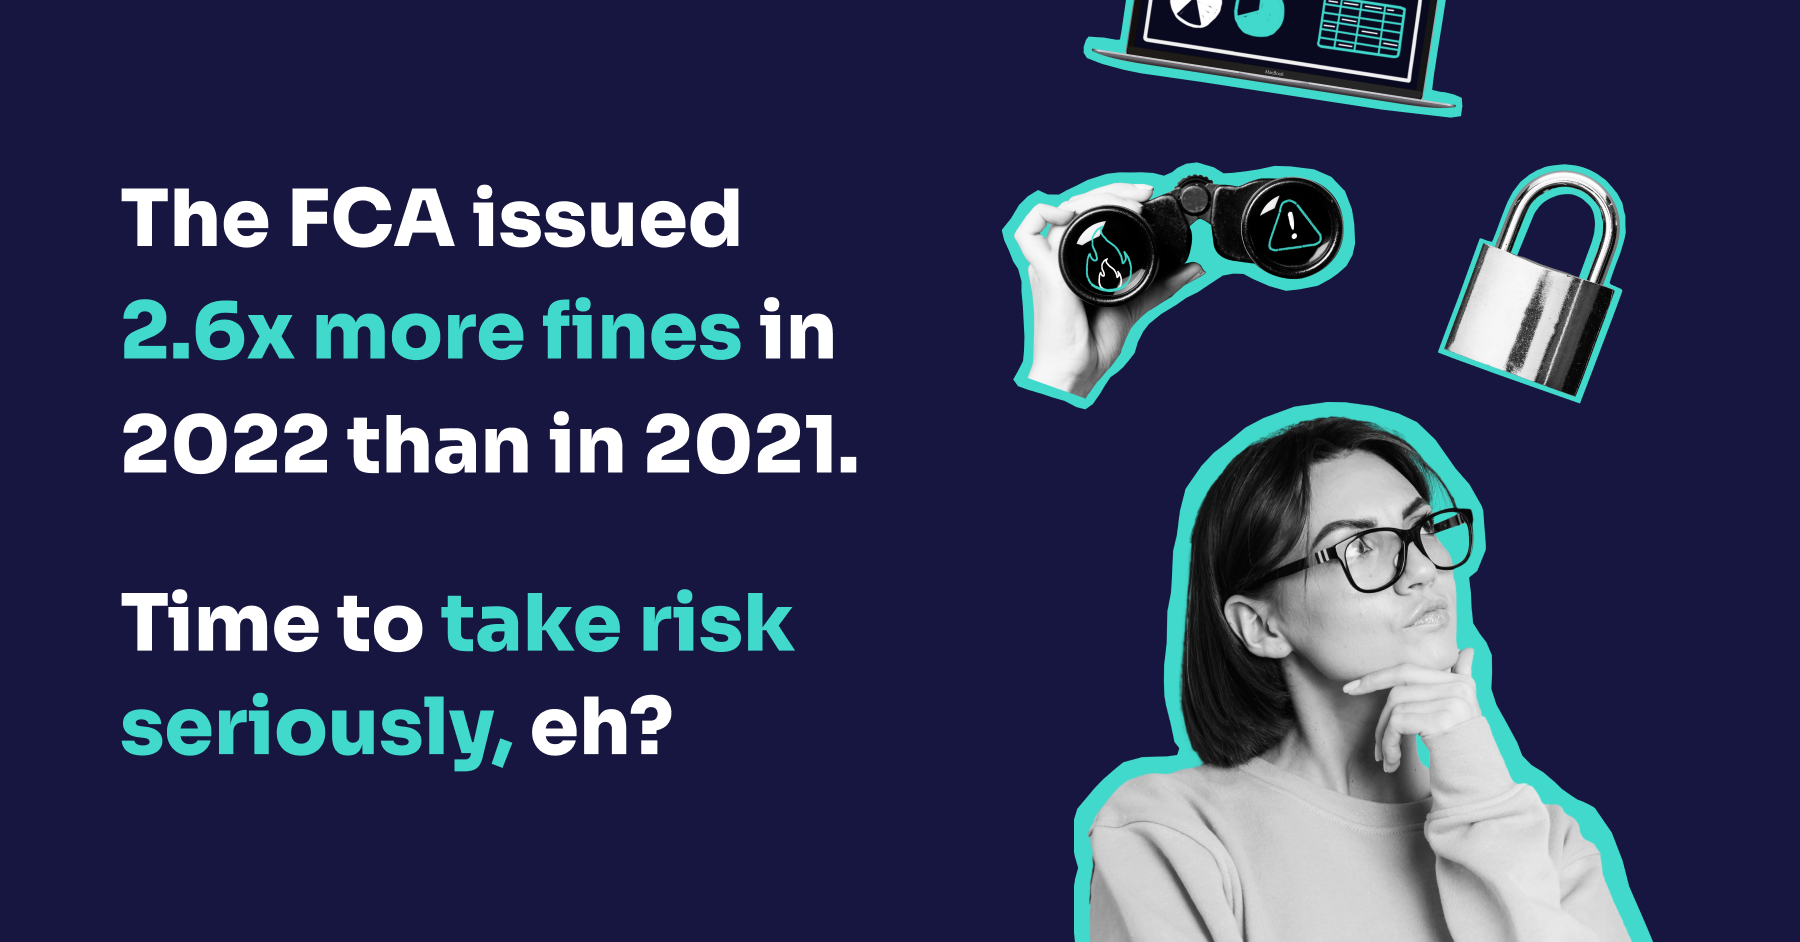 Graphic about FCA's 2022 fines saying "The FCA issued 2.6x more fines in 2022 than in 2021. Time to take risk seriously, eh?"